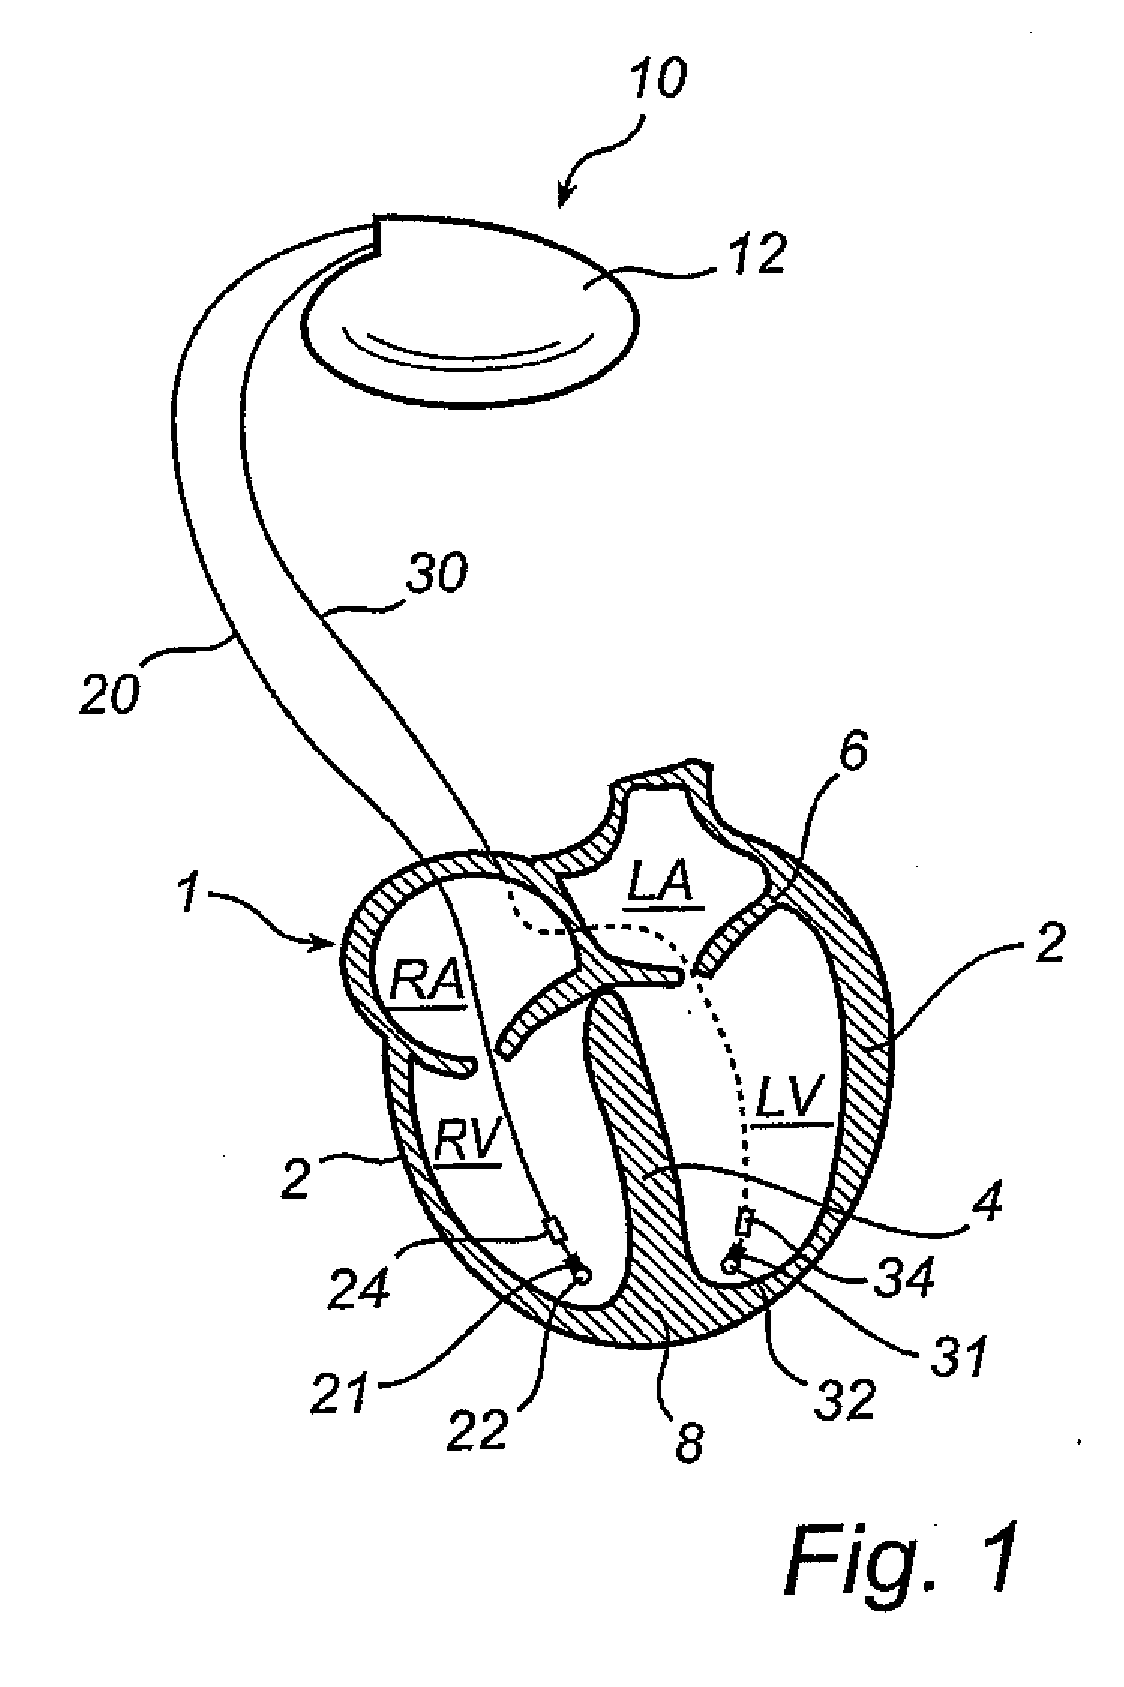 Implantable cardiac stimulator, device and method for monitoring the heart cycle in a human heart